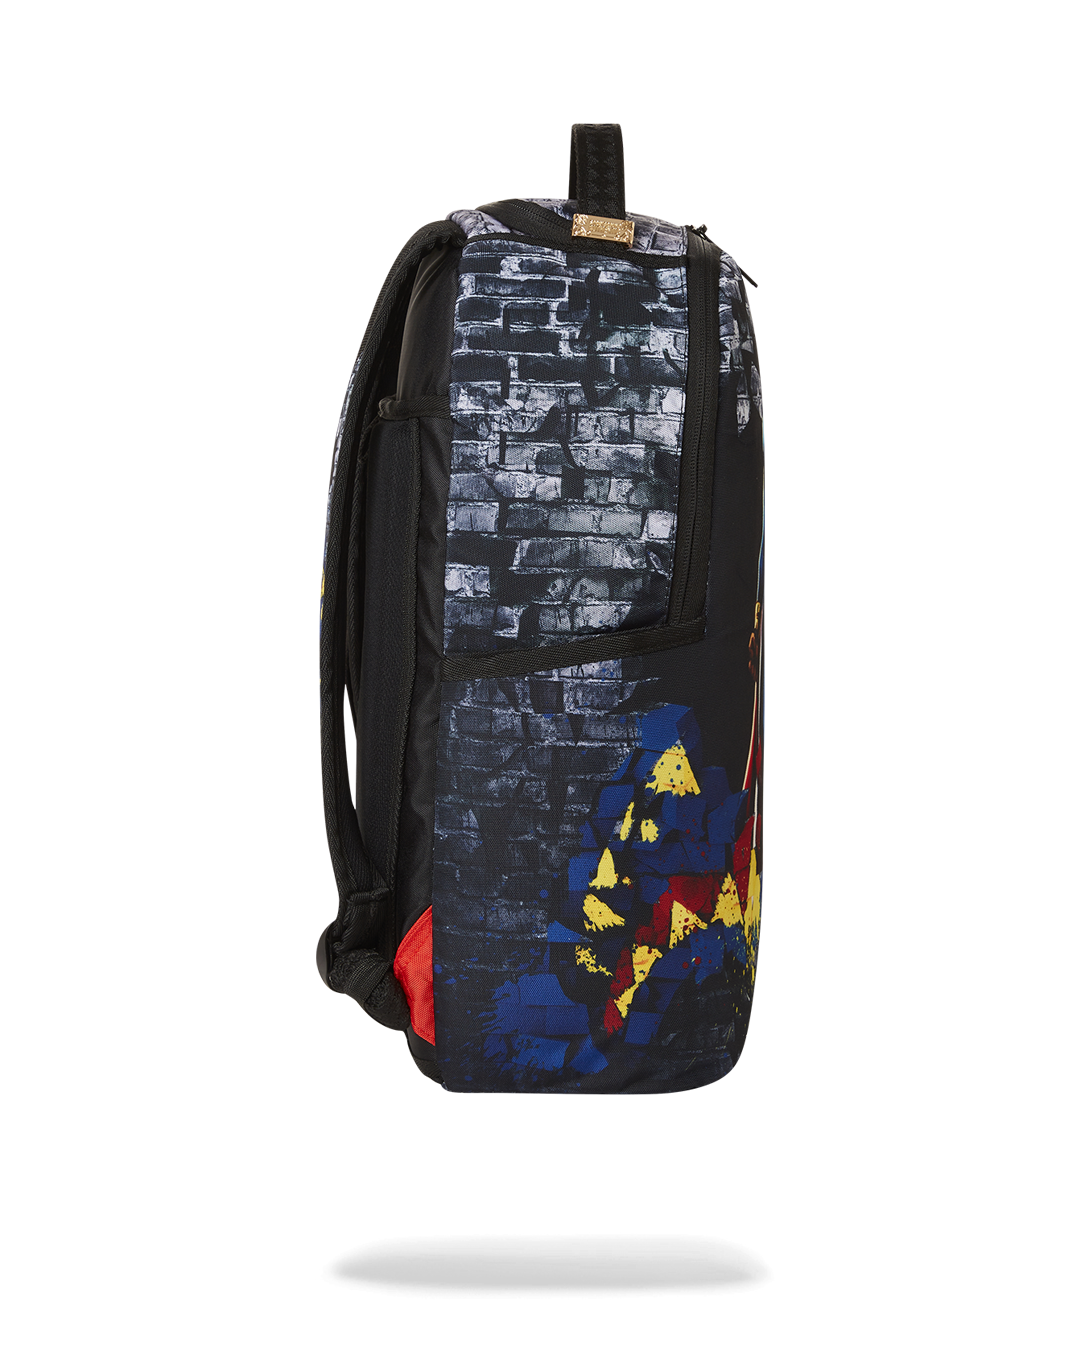 SPRAYGROUND® BACKPACK SUPERMAN NO STOPPING ME BACKPACK